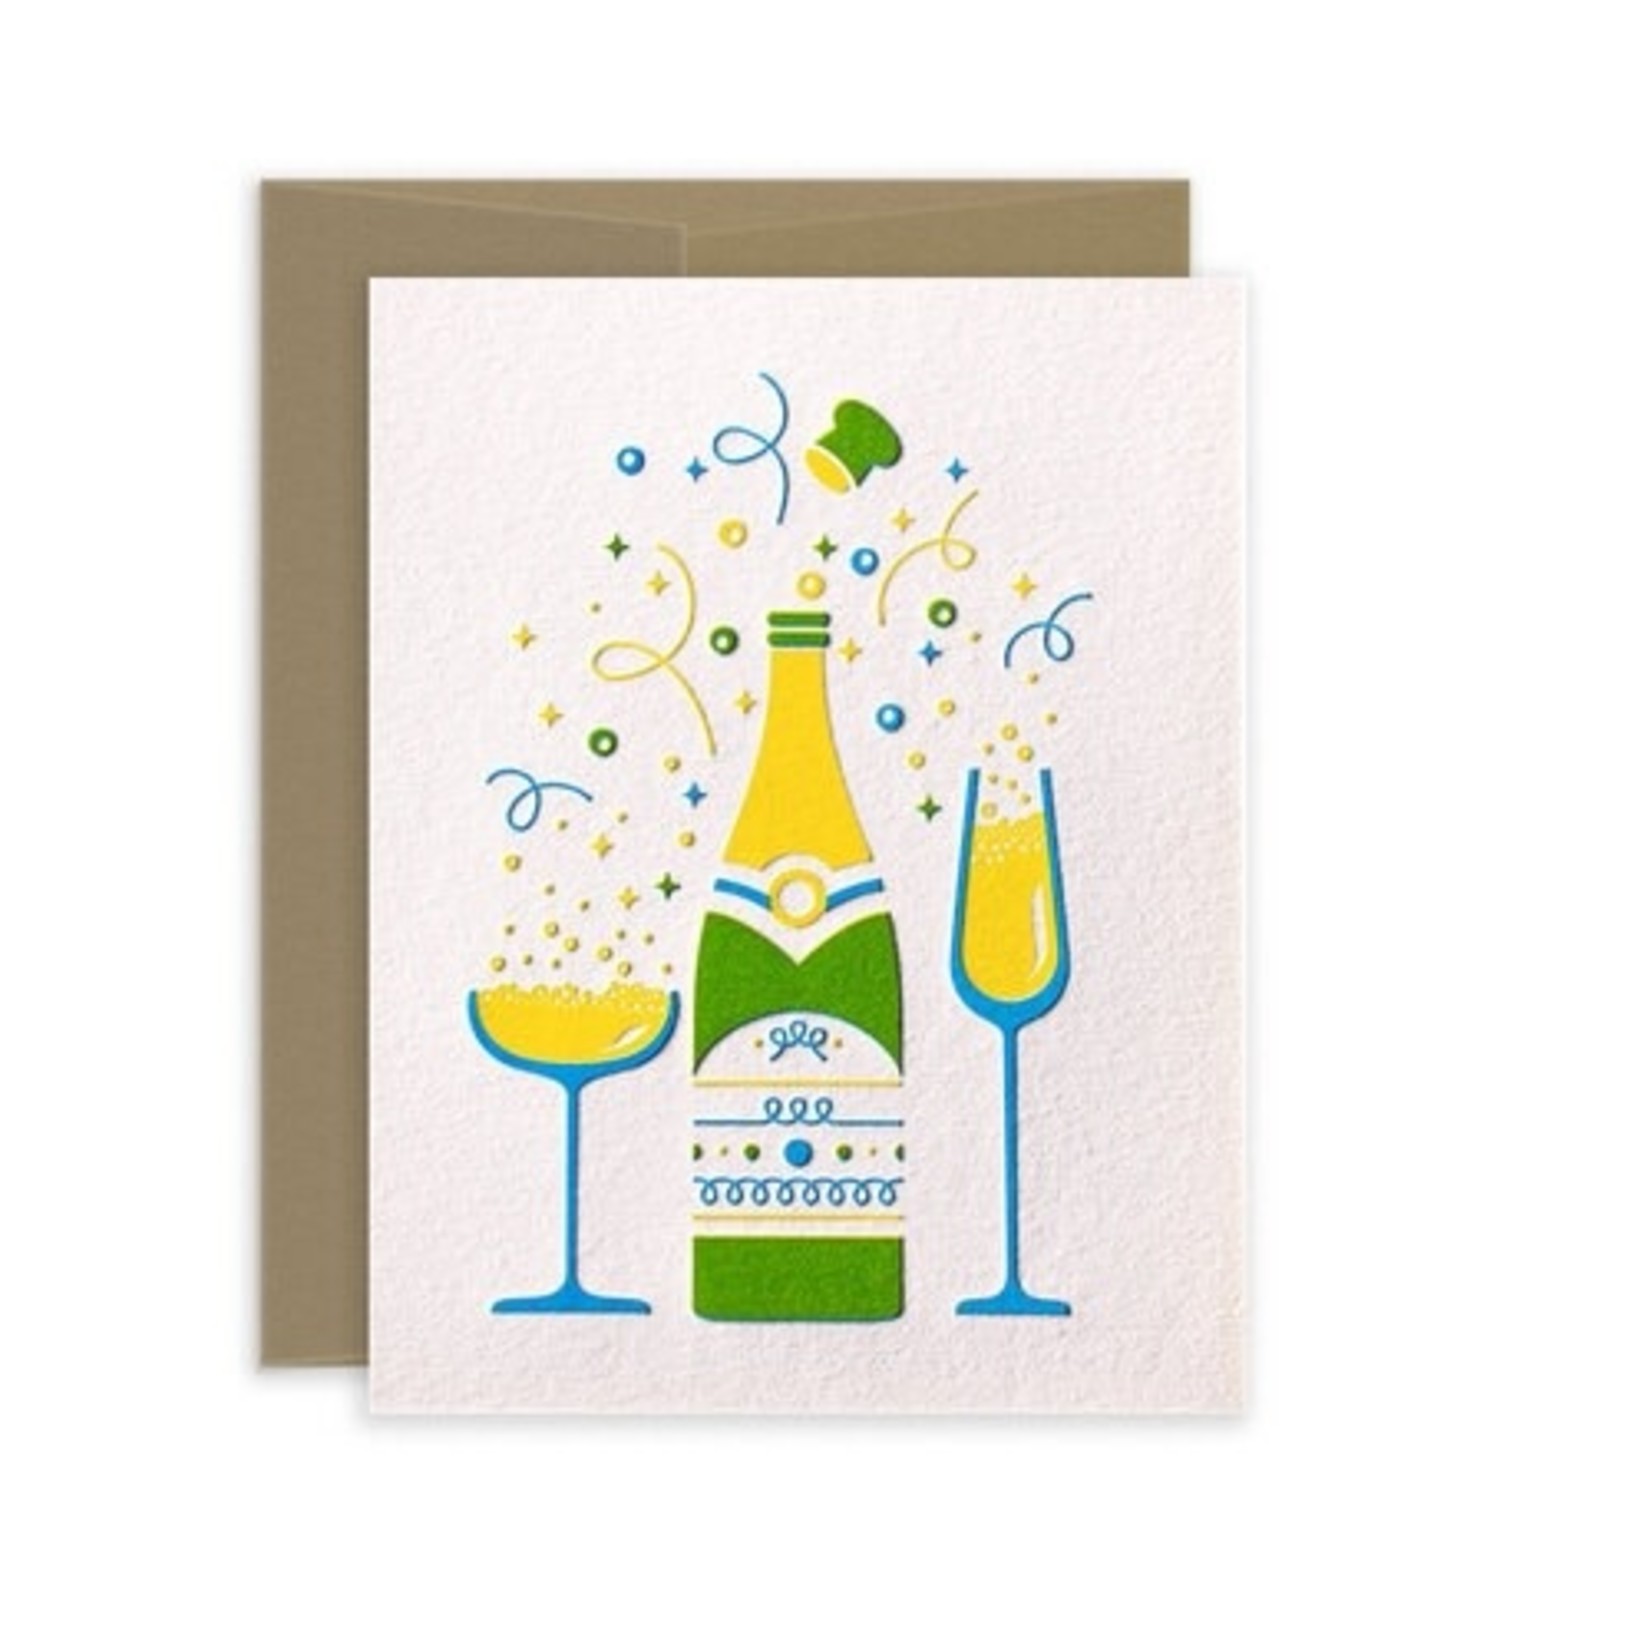 Greeting Cards - Congrats Champagne Celebration